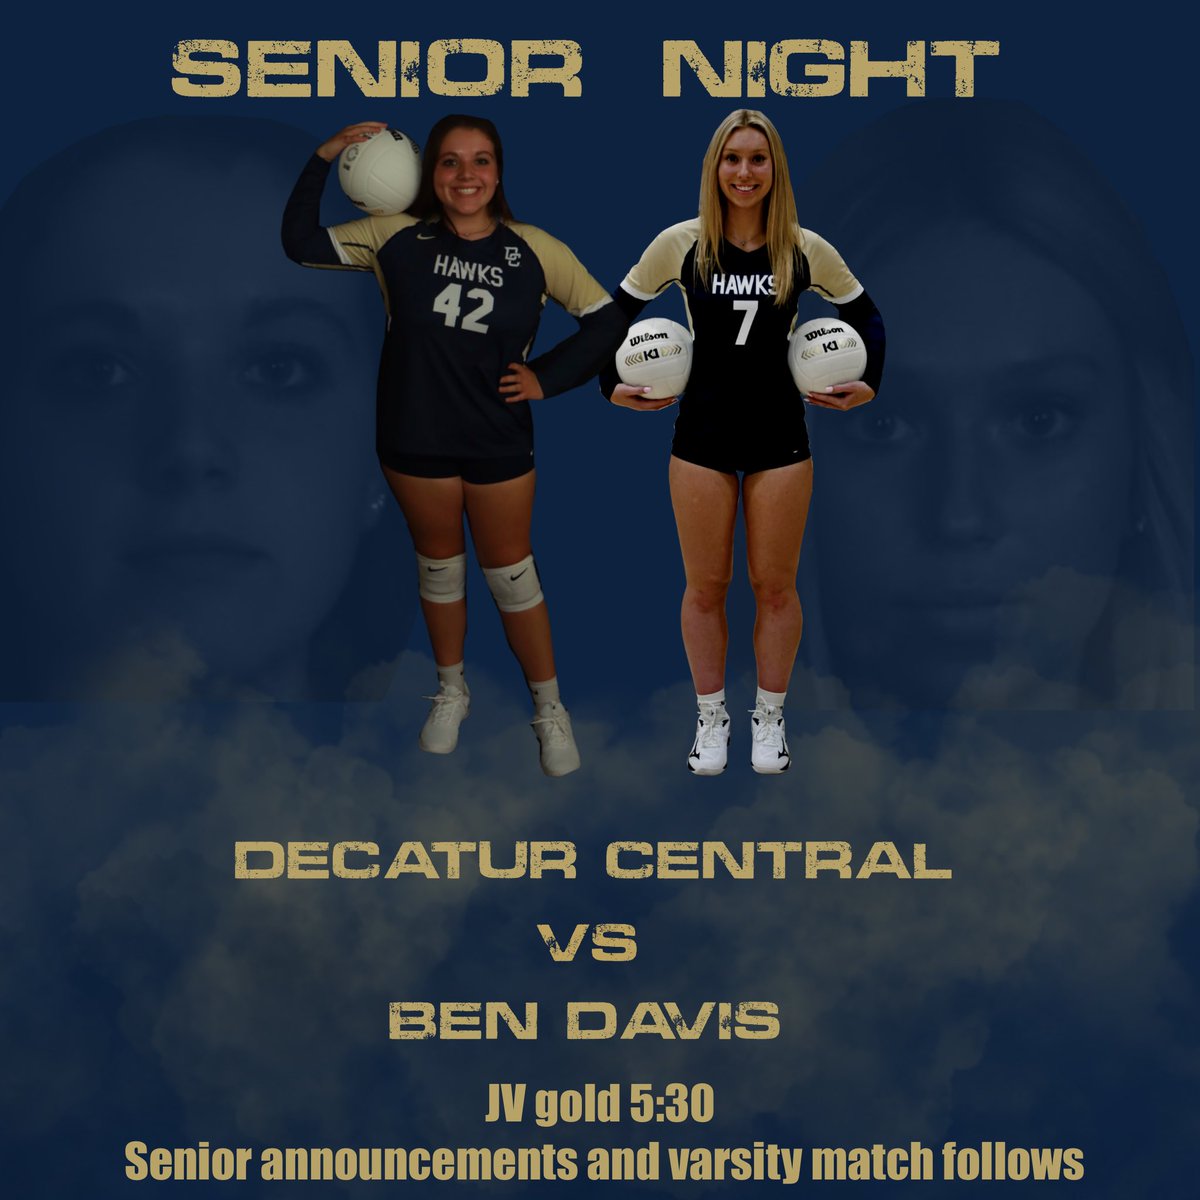 Come out and pack the stands to support your Lady Hawks Volleyball Seniors as they host Ben Davis tonight for Senior Night. JV will start at 5:30pm with Varsity following. Tickets are available at the link below. #decaturproud #buildingalegacy